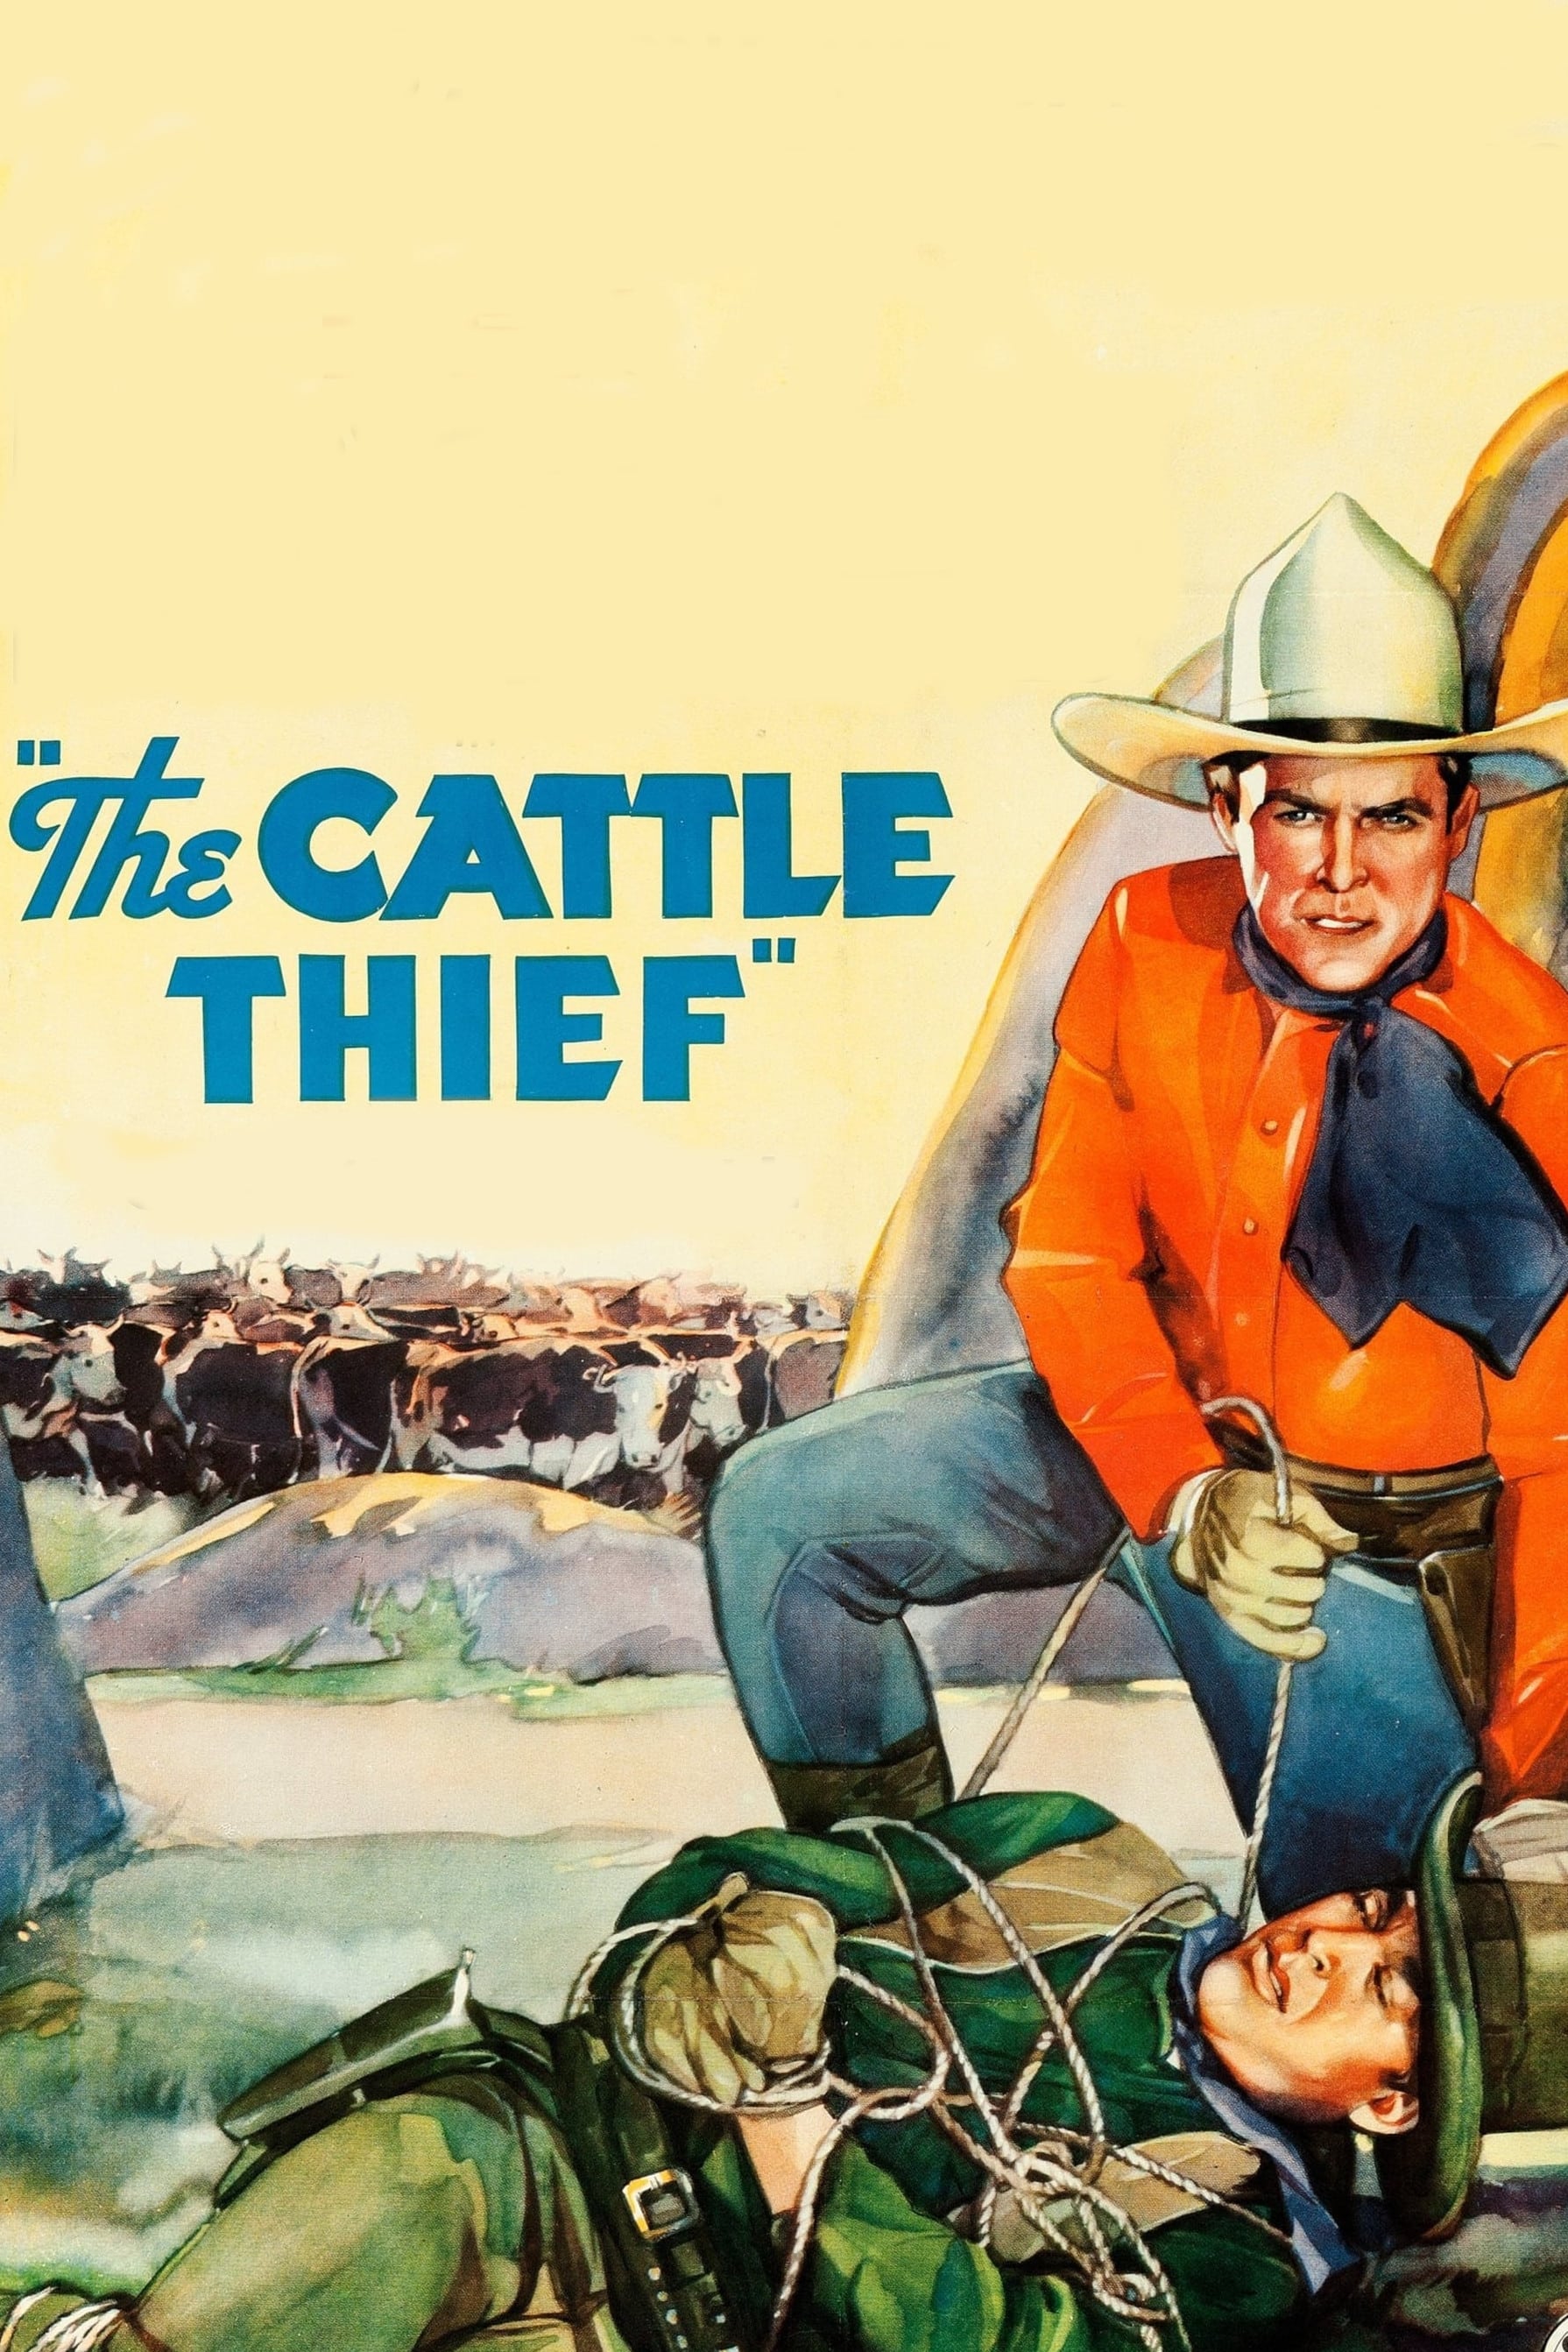 The Cattle Thief (1936)